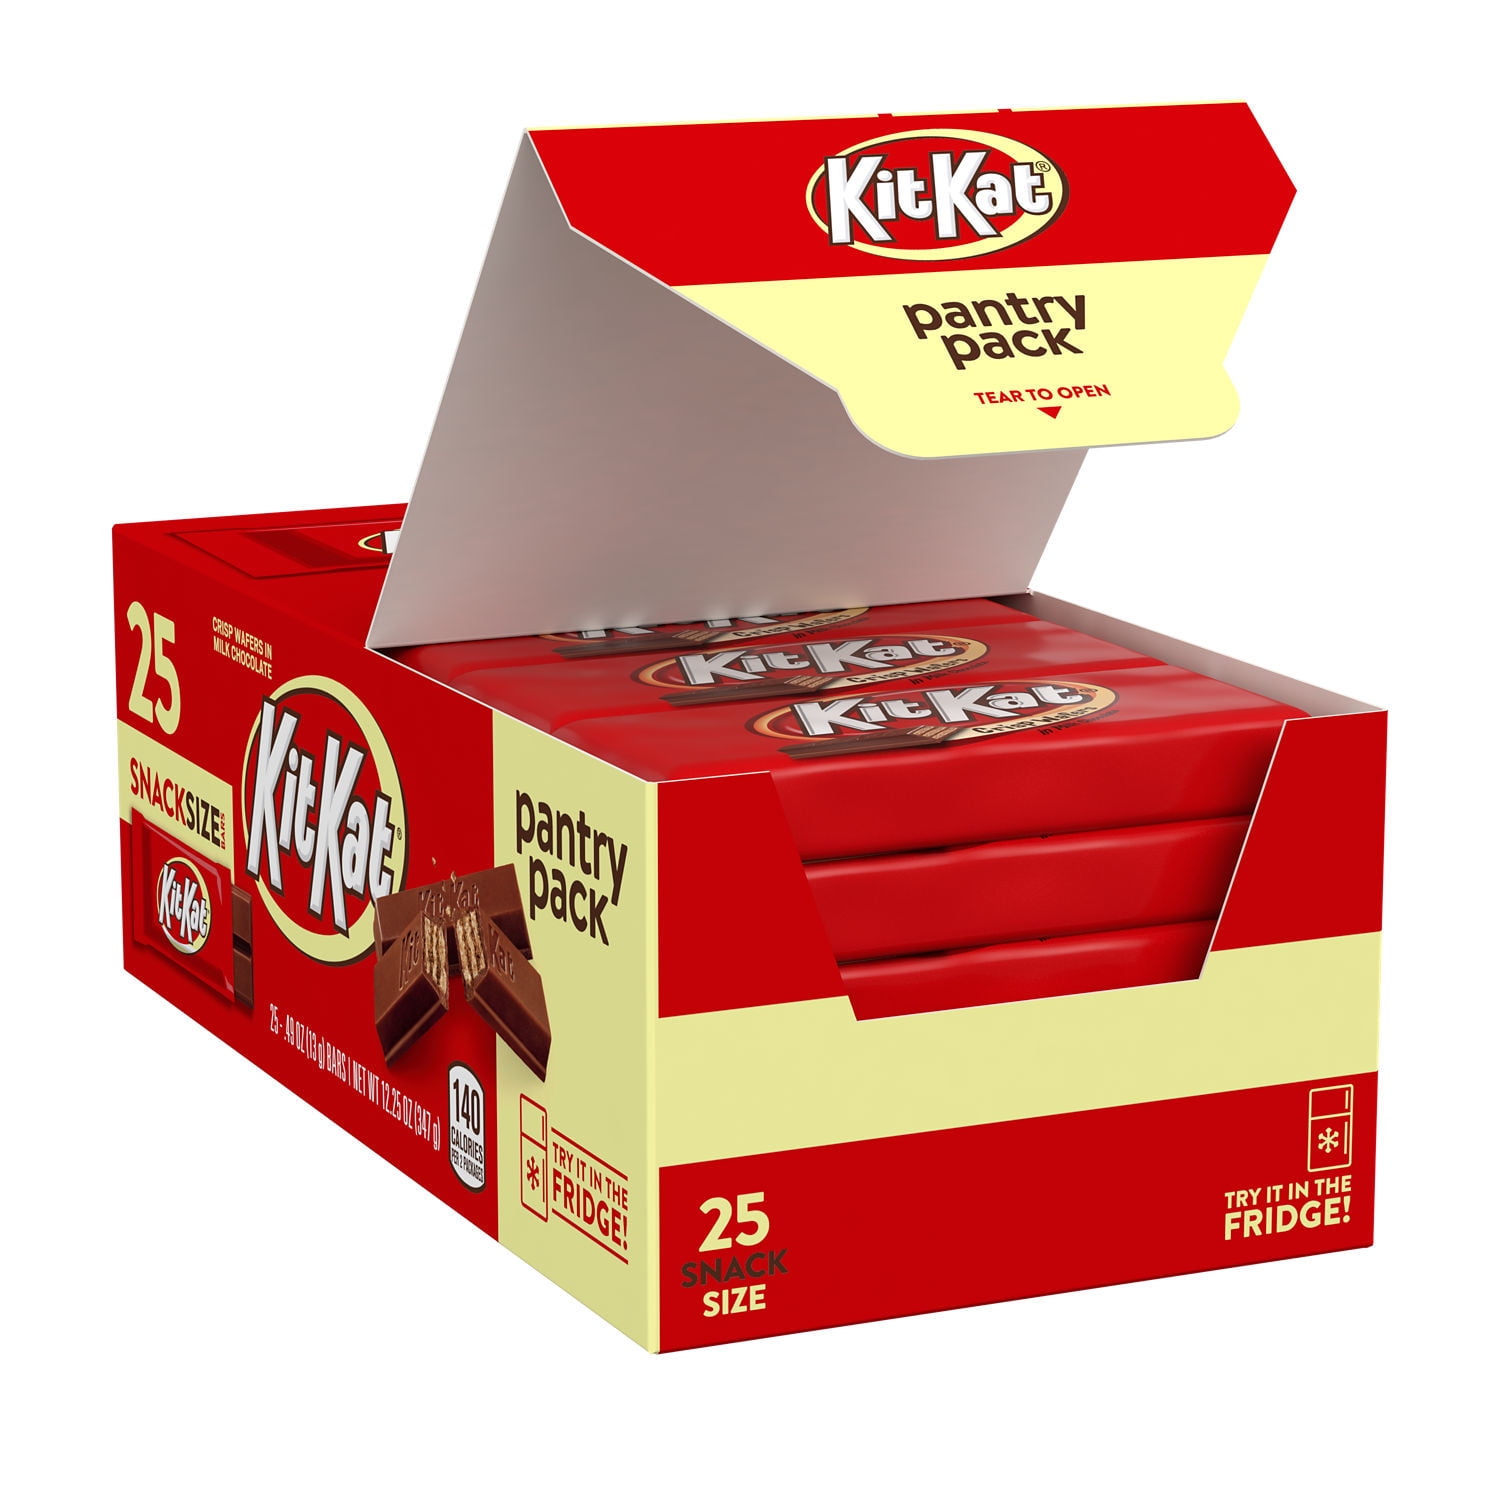 Tot ziens besluiten Garderobe KIT KAT®, Milk Chocolate Snack Size Wafer Candy, Individually Wrapped,  12.25 oz, Pantry Pack (25 Pieces) - Walmart.com